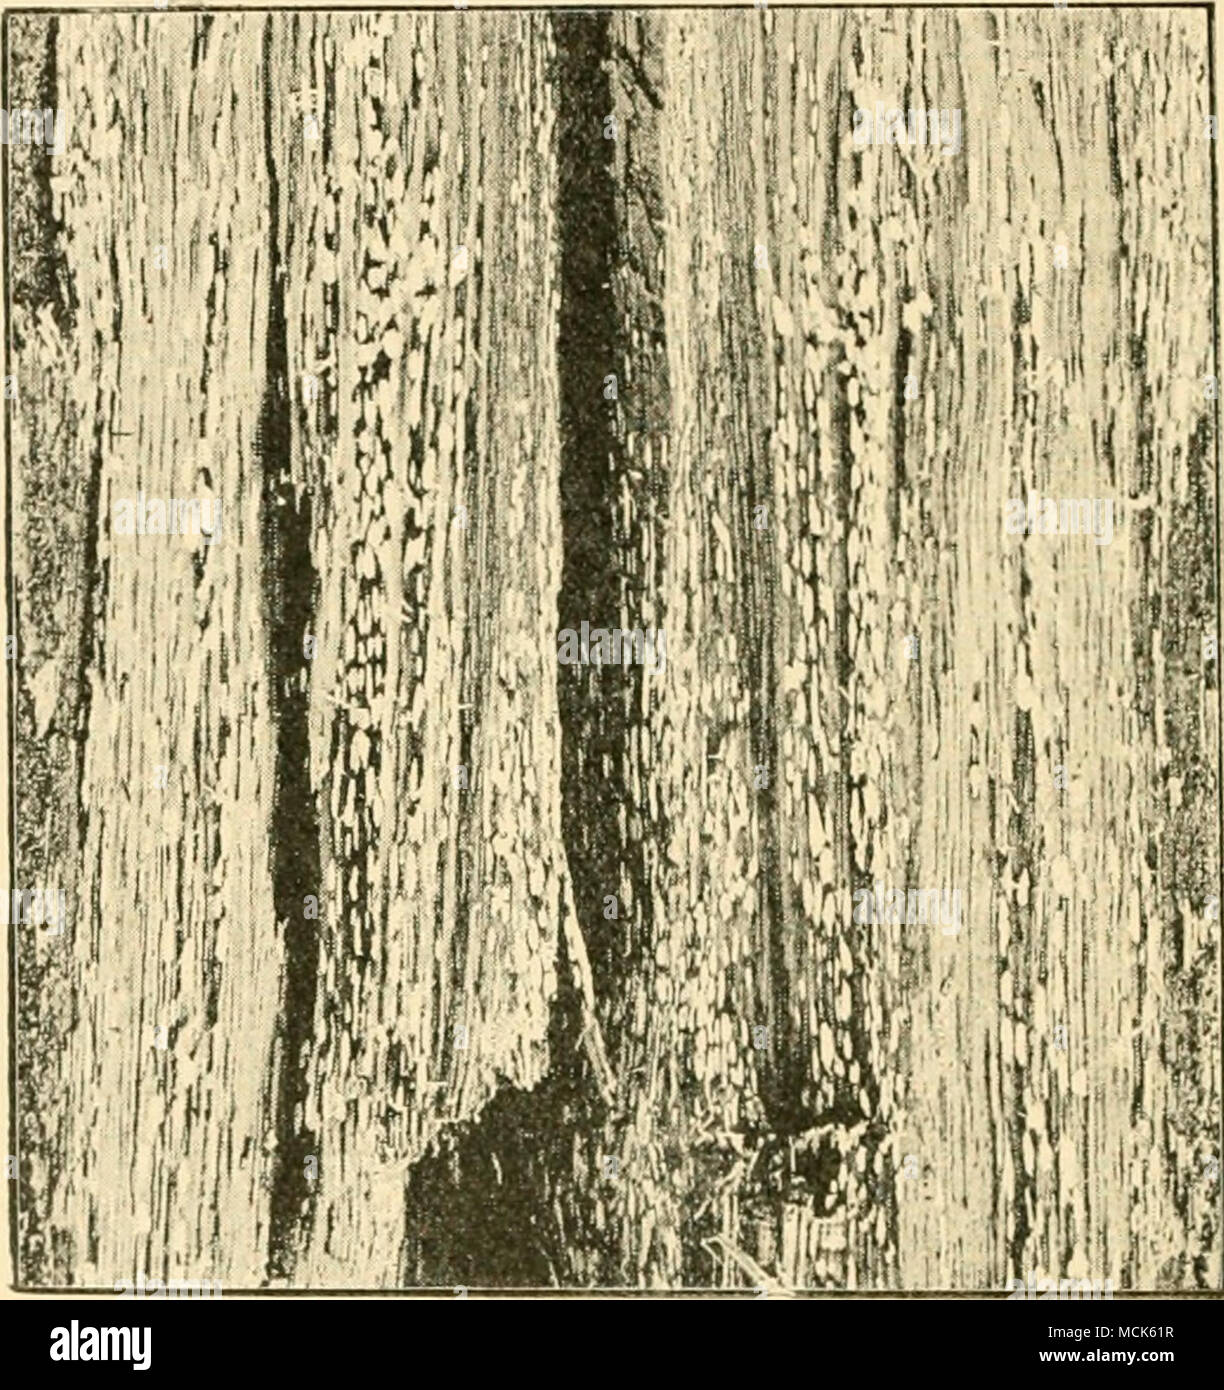 . Fio. 200. —.SVt/'«i(i/i jrusti^losum. Destniction of Oak-wood. Longitmlinal section showing the brown wood with isolated hollow spots containing white mycelium, (v. Tubeuf phot.) Stereum frustulosum Fries. (Thelephora perdix Hartig).- (Britain and U.S. America.) The sporophores form greyish- brown plate-like crusts with concentric markings; they are small, never exceeding tlie size of a finger-nail, but generally occur in numbers together. The hymenial layer is composed of club- shaped basidia beset with hair-like outgrowths; some of the basidia produce four spores, others are sterile and gr Stock Photo